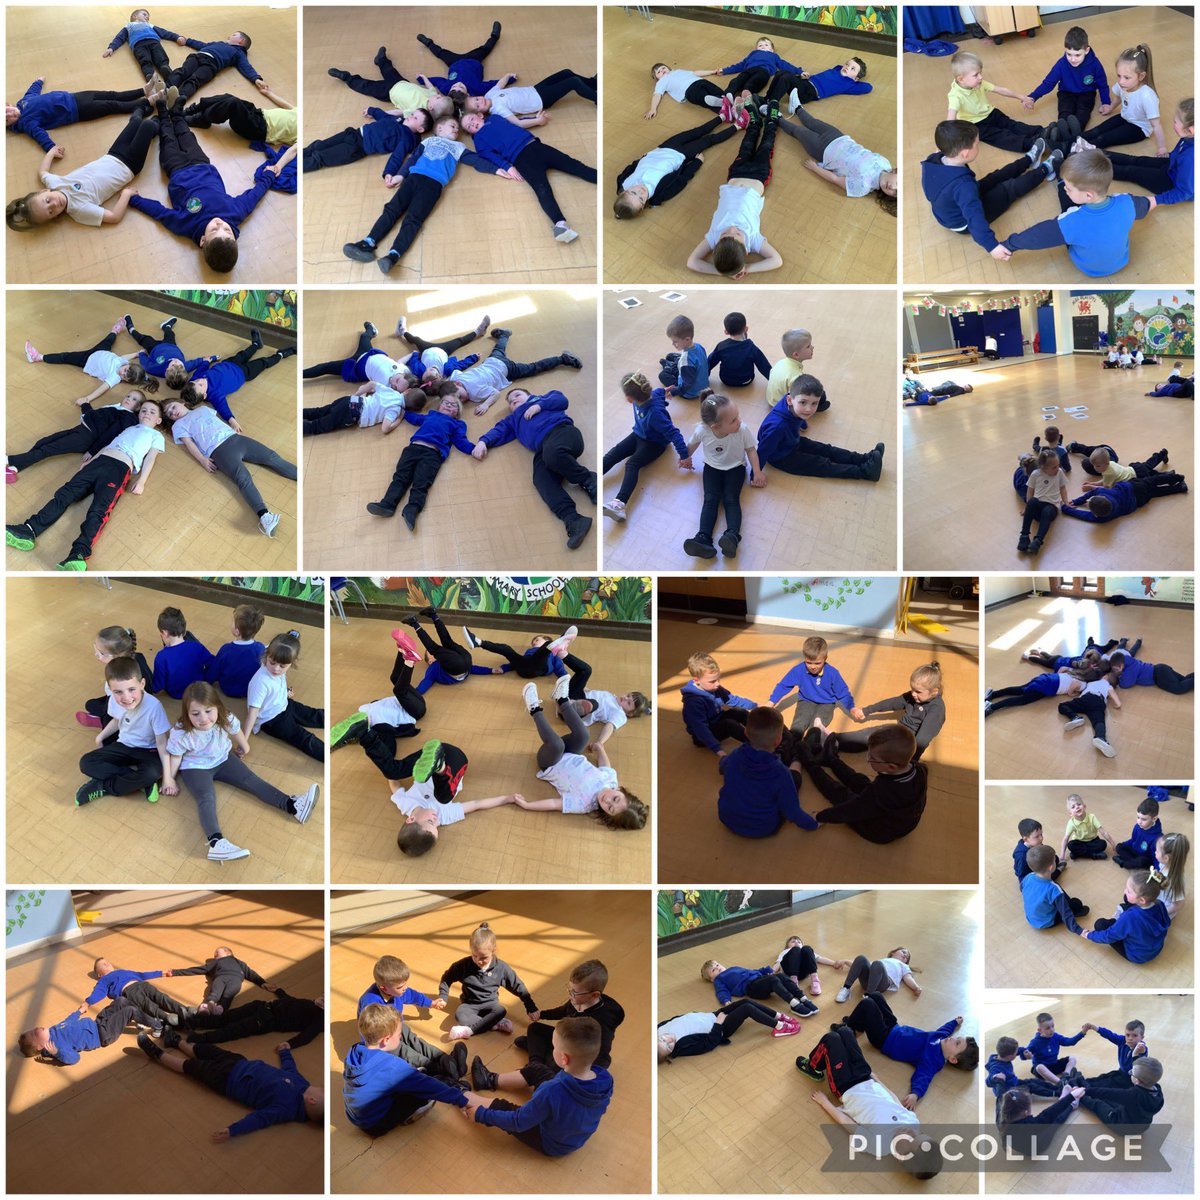 We created different shapes and patterns with our bodies; working together to make the shape of a spider web 🕷️🕸️@cwmffrwdoer @MissEvansCwmff @CwmfMissGilbert